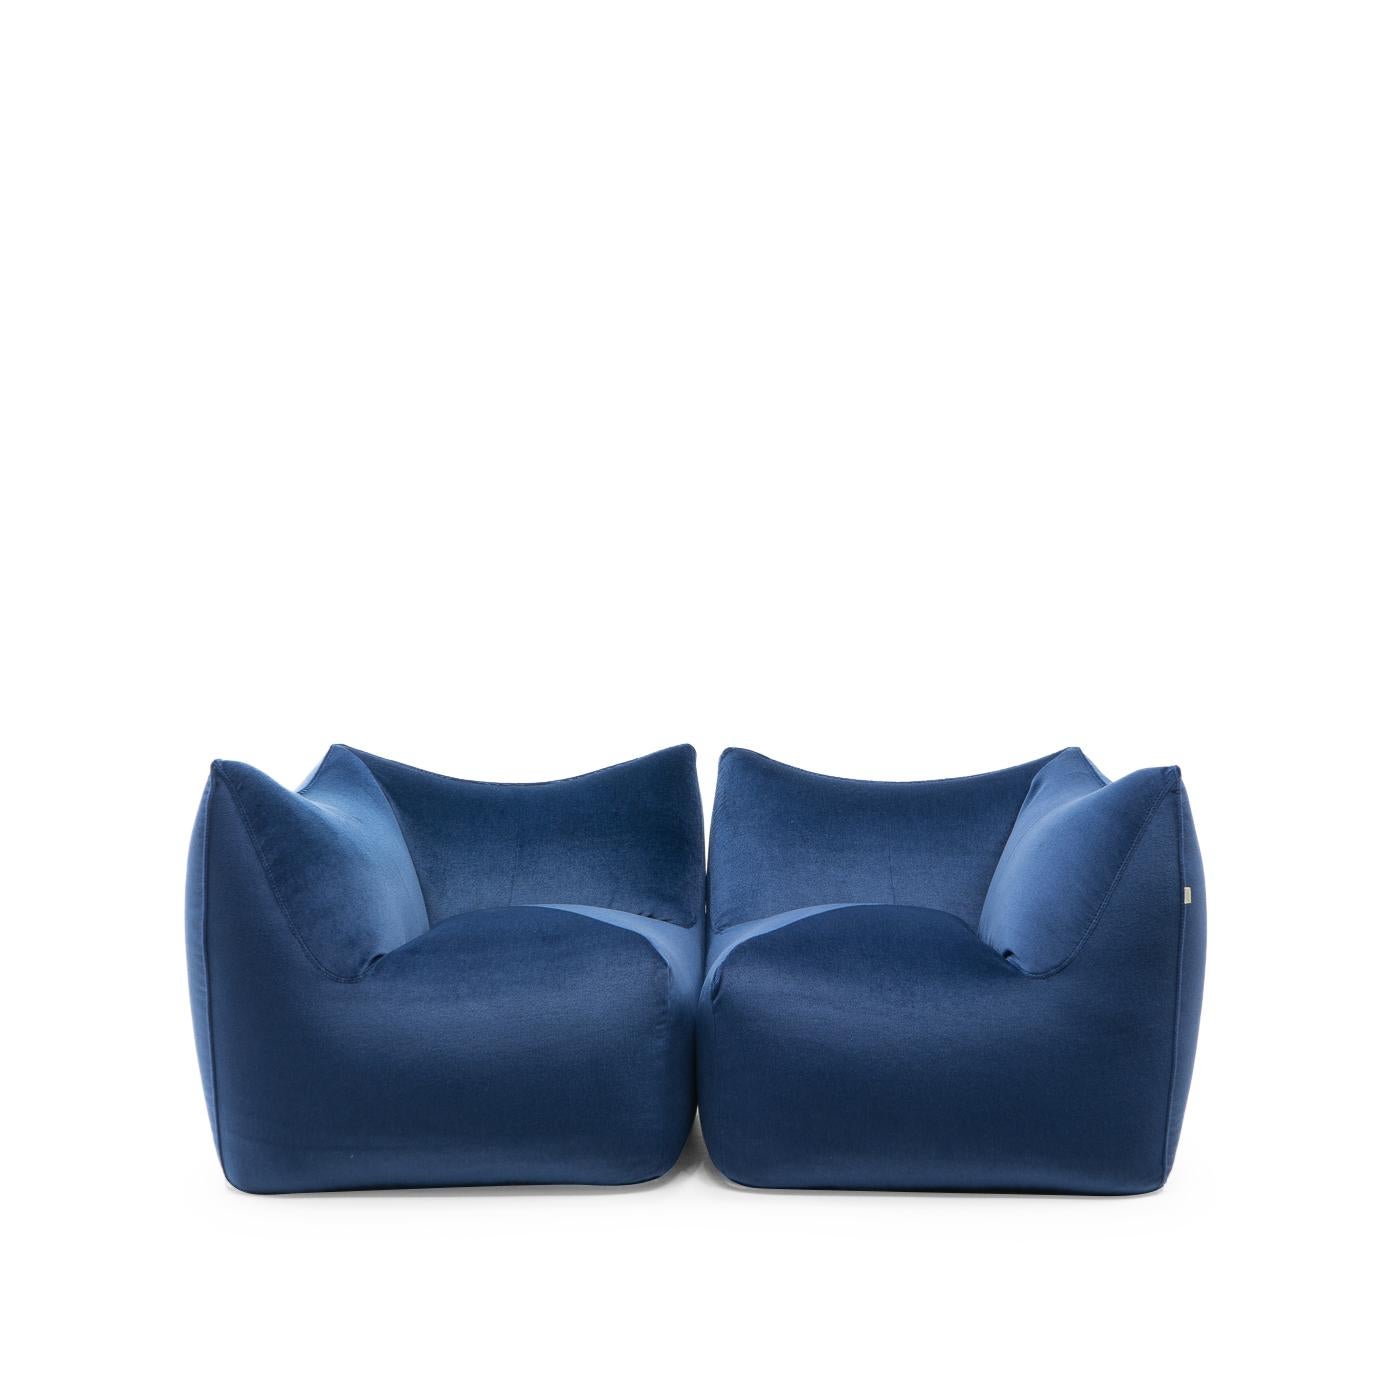 Iconic set by Mario Bellini for B&B Italia, consisting of two single seat Bambole Sofa elements that form either two single lounge chairs or one sofa when combined.

We have selected Musco, a dark blue mohair by De Ploeg, the Netherlands:
Mohair